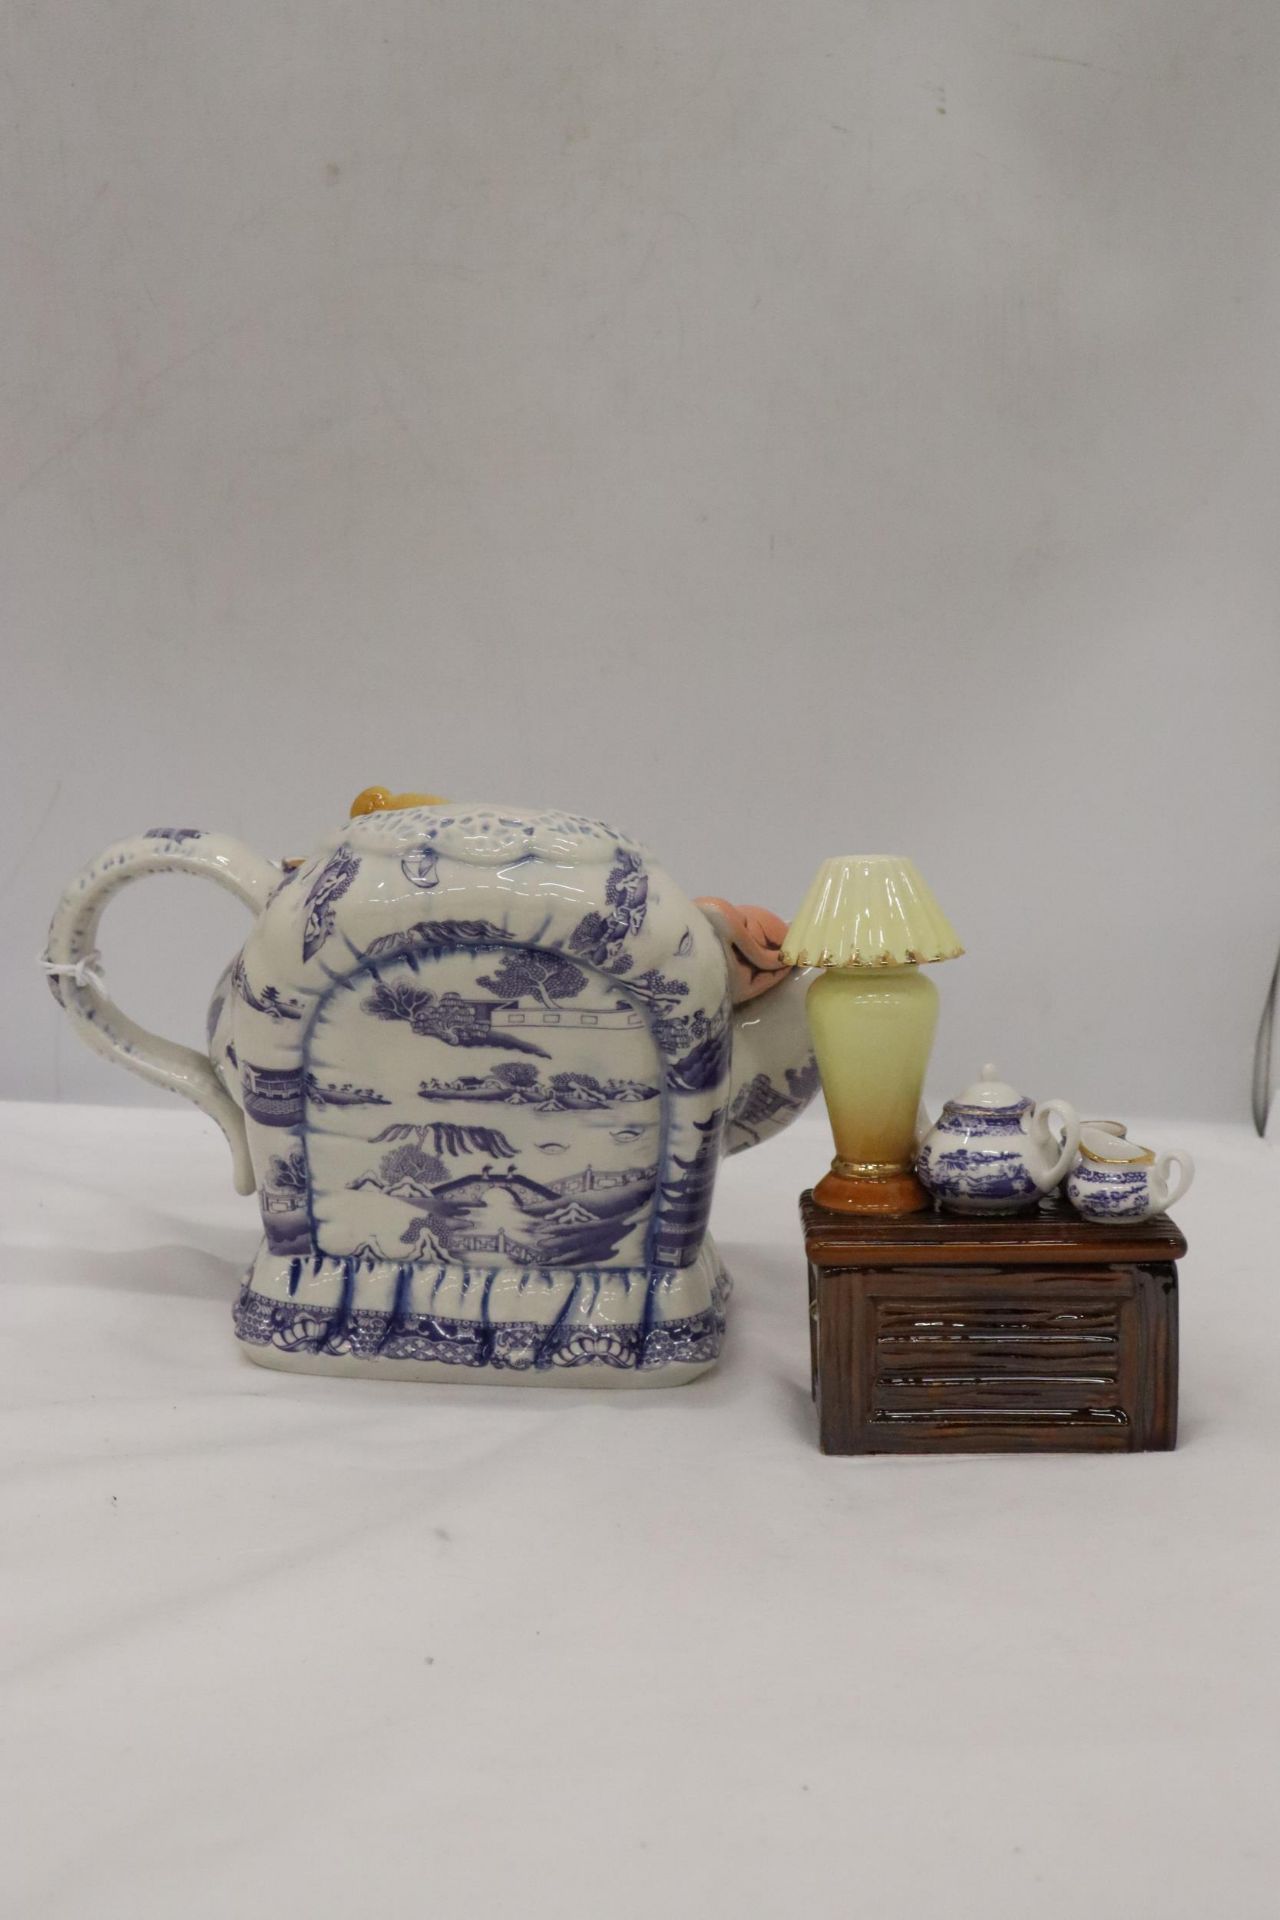 A RINGTONS LIMITED EDITION, 778/7500, 'TEA TIME' TEAPOT, IN GOOD CONDITION WITH CERTIFICATE OF - Image 8 of 10